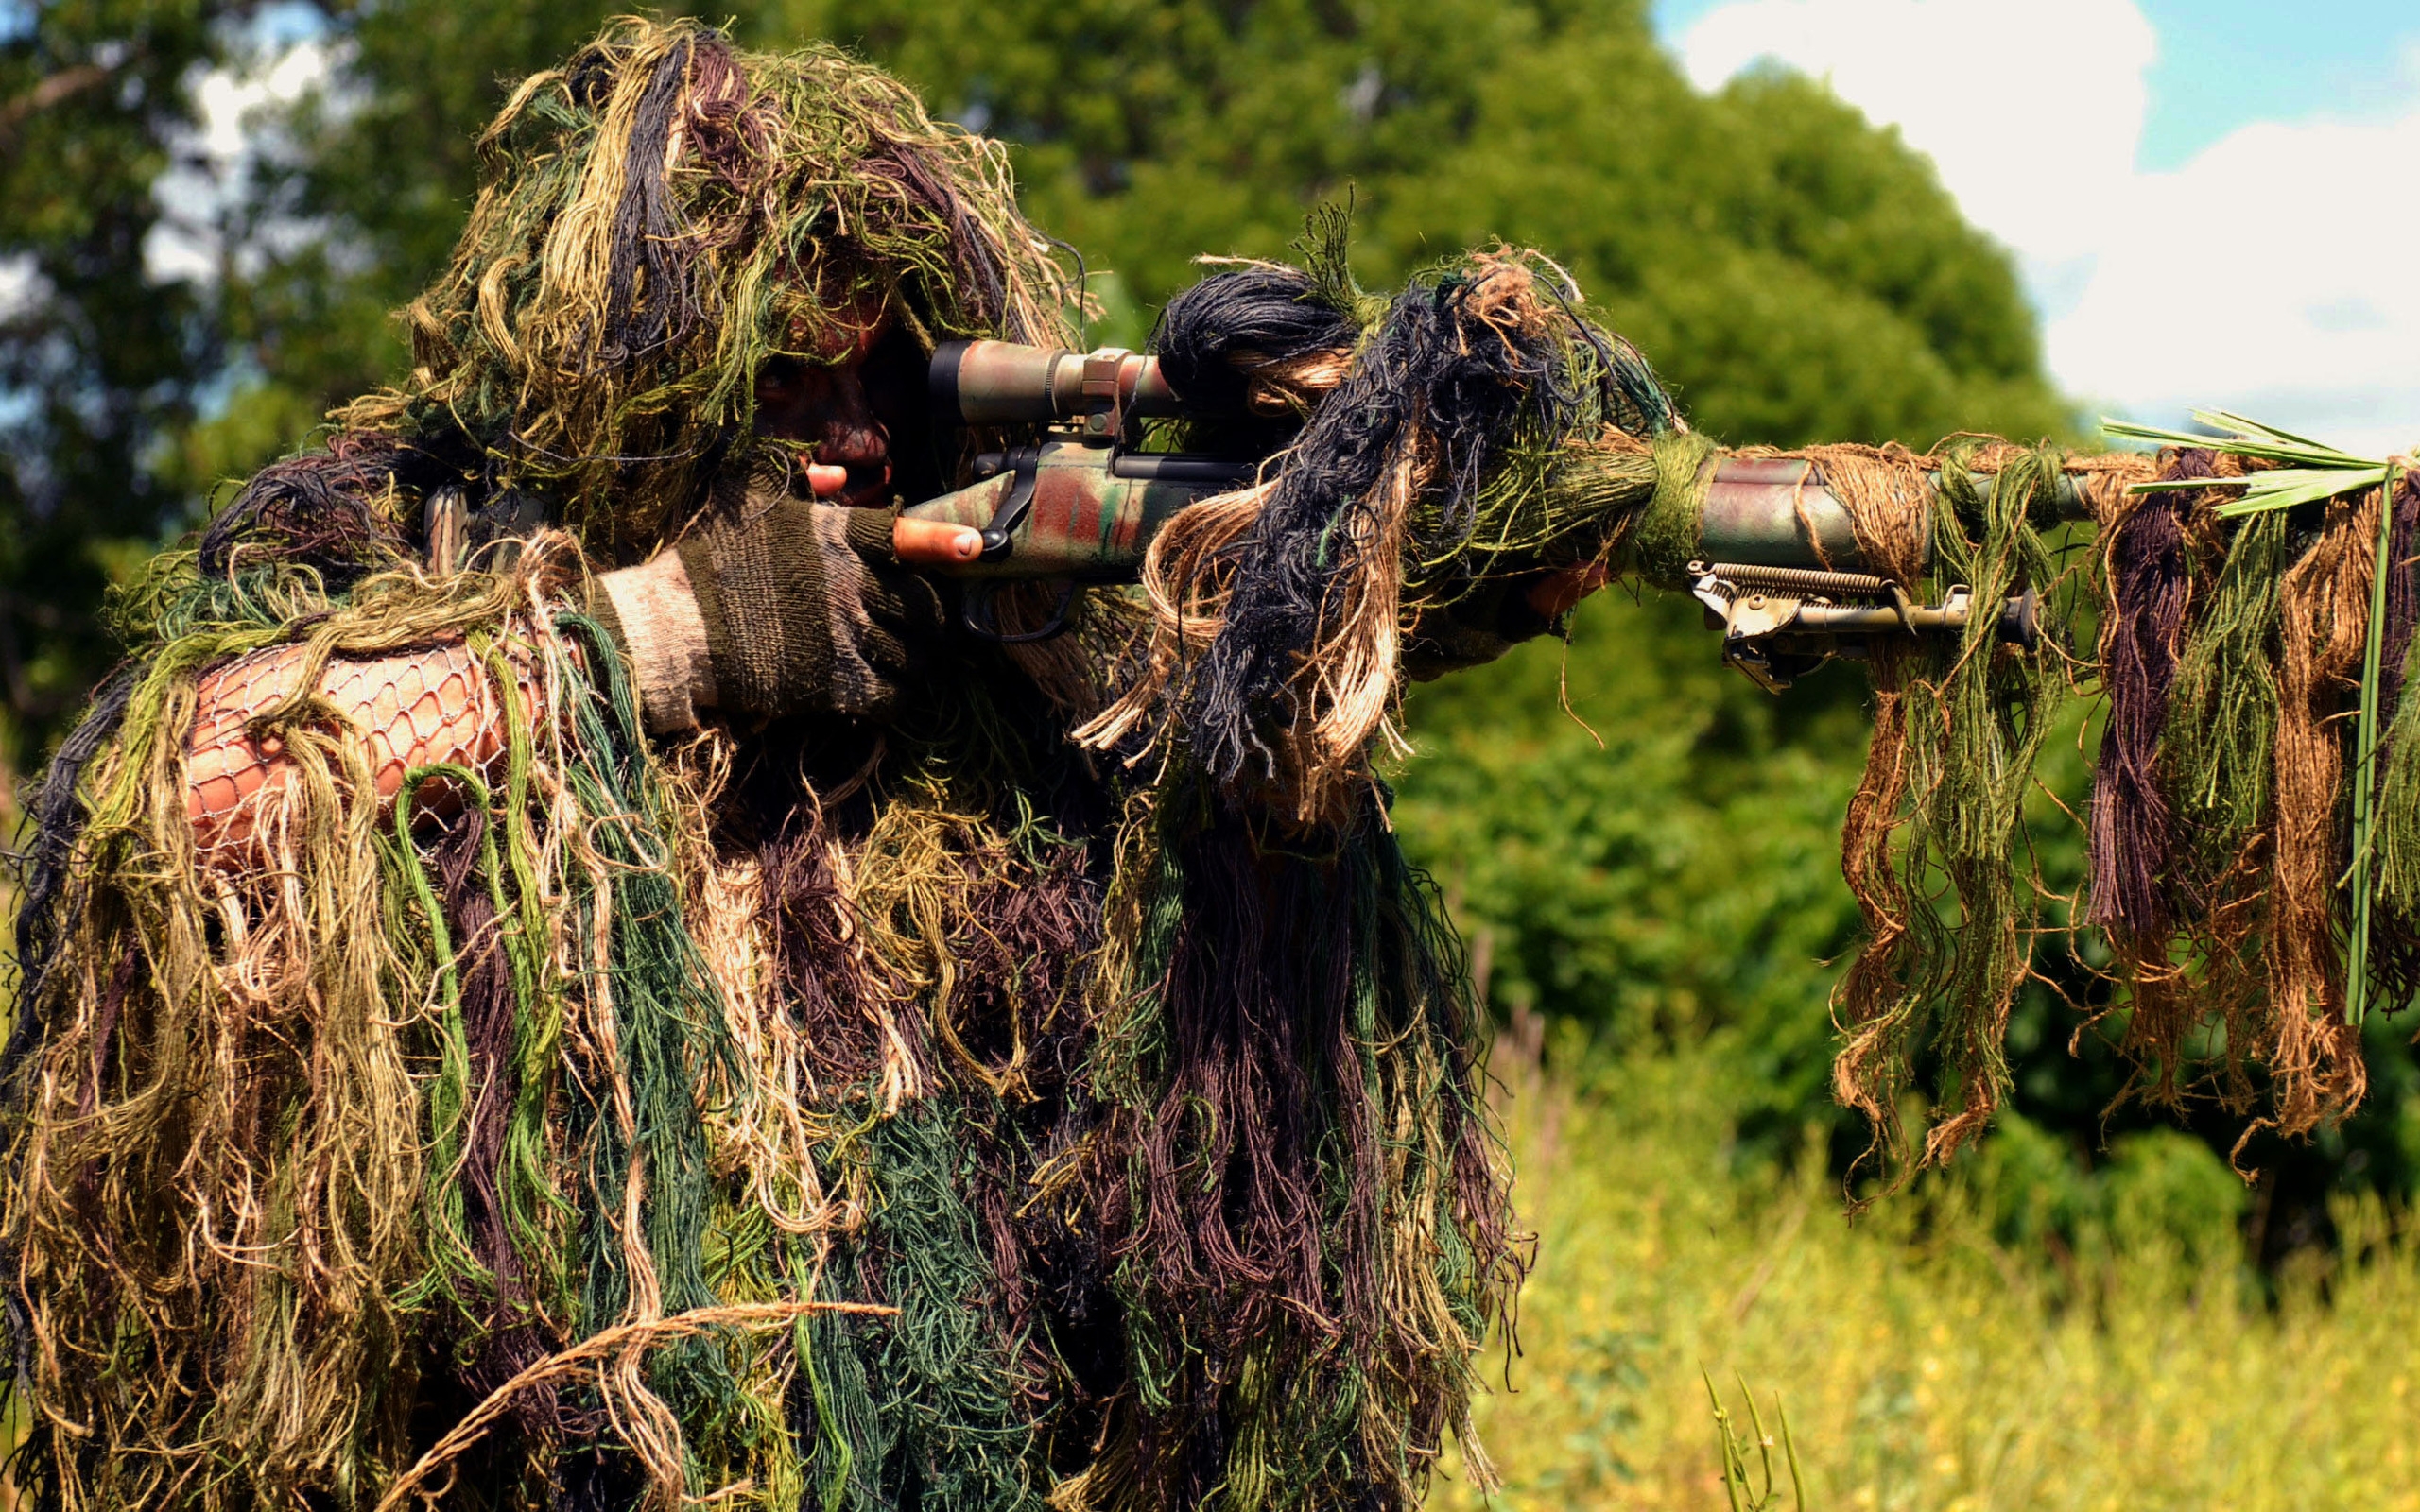 sniper, Military, Weapons, Guns, Rifles, Camouflage, People, Fields, Grass, Trees, Shoot, Eyes, Assassin, Warriors, Soldiers Wallpaper